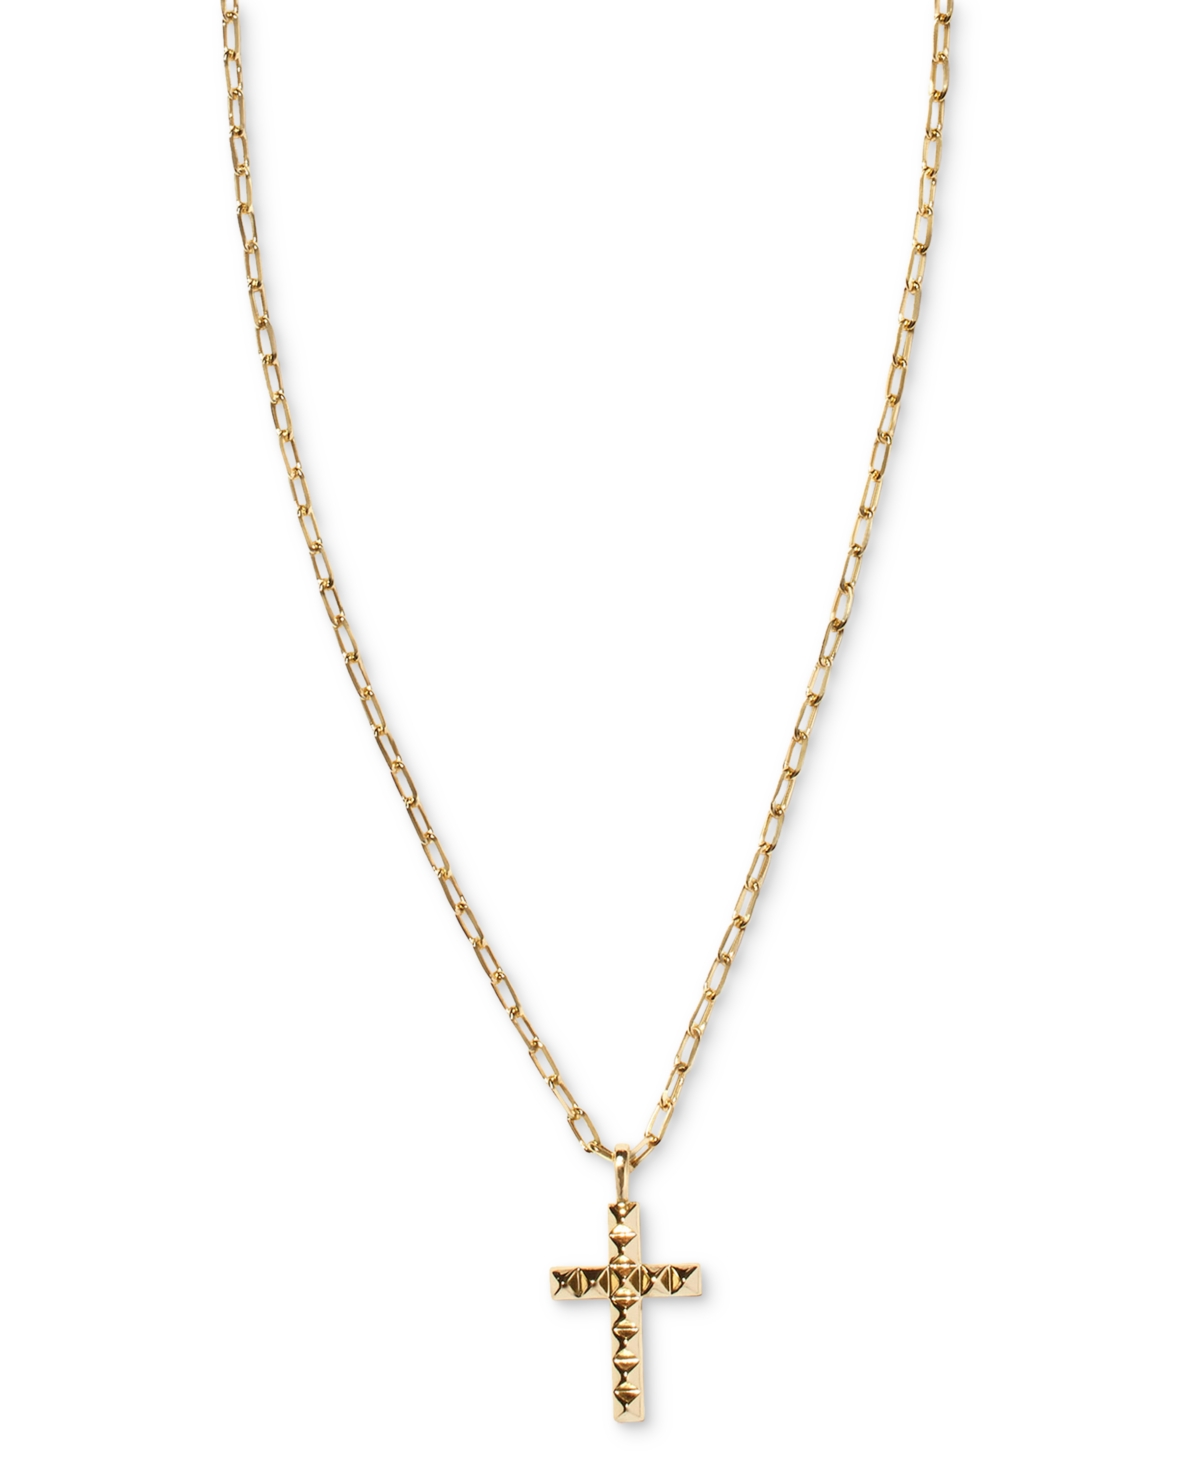 14k Gold-Plated Cross Pendant Necklace, 16" + 3" extender - Gold